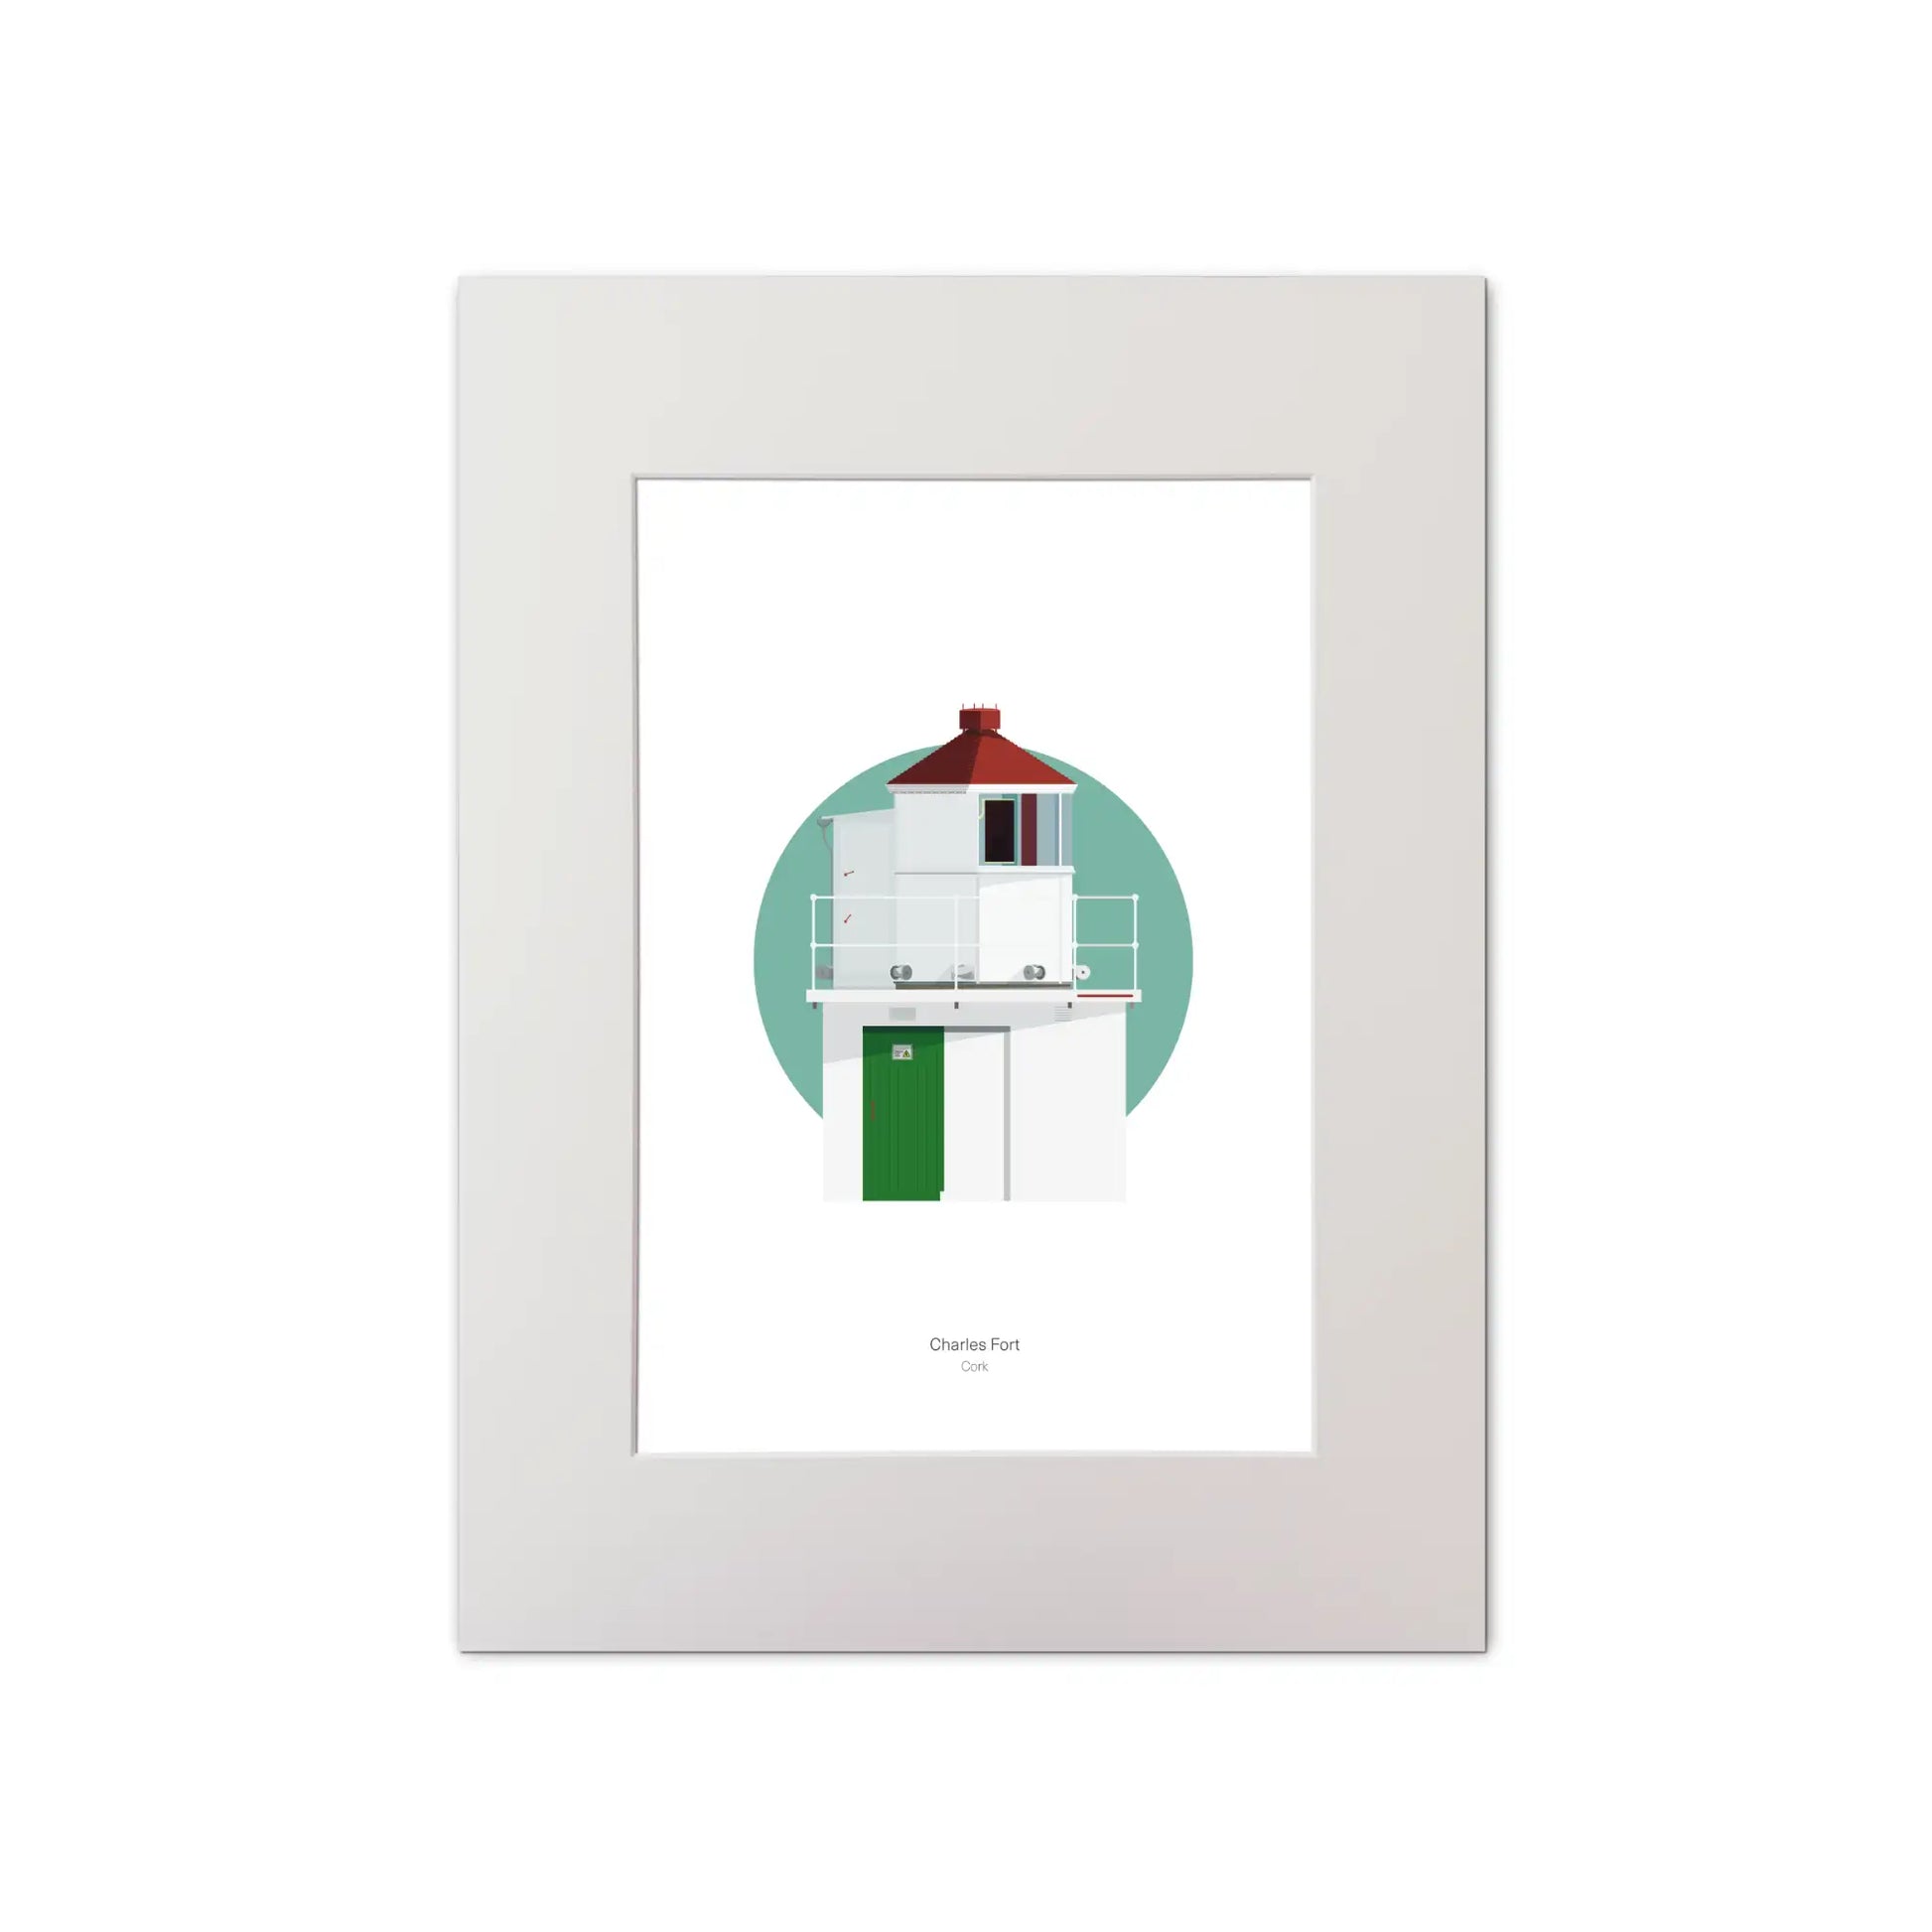 Illustration of Charles Fort lighthouse on a white background inside light blue square, mounted and measuring 30x40cm.